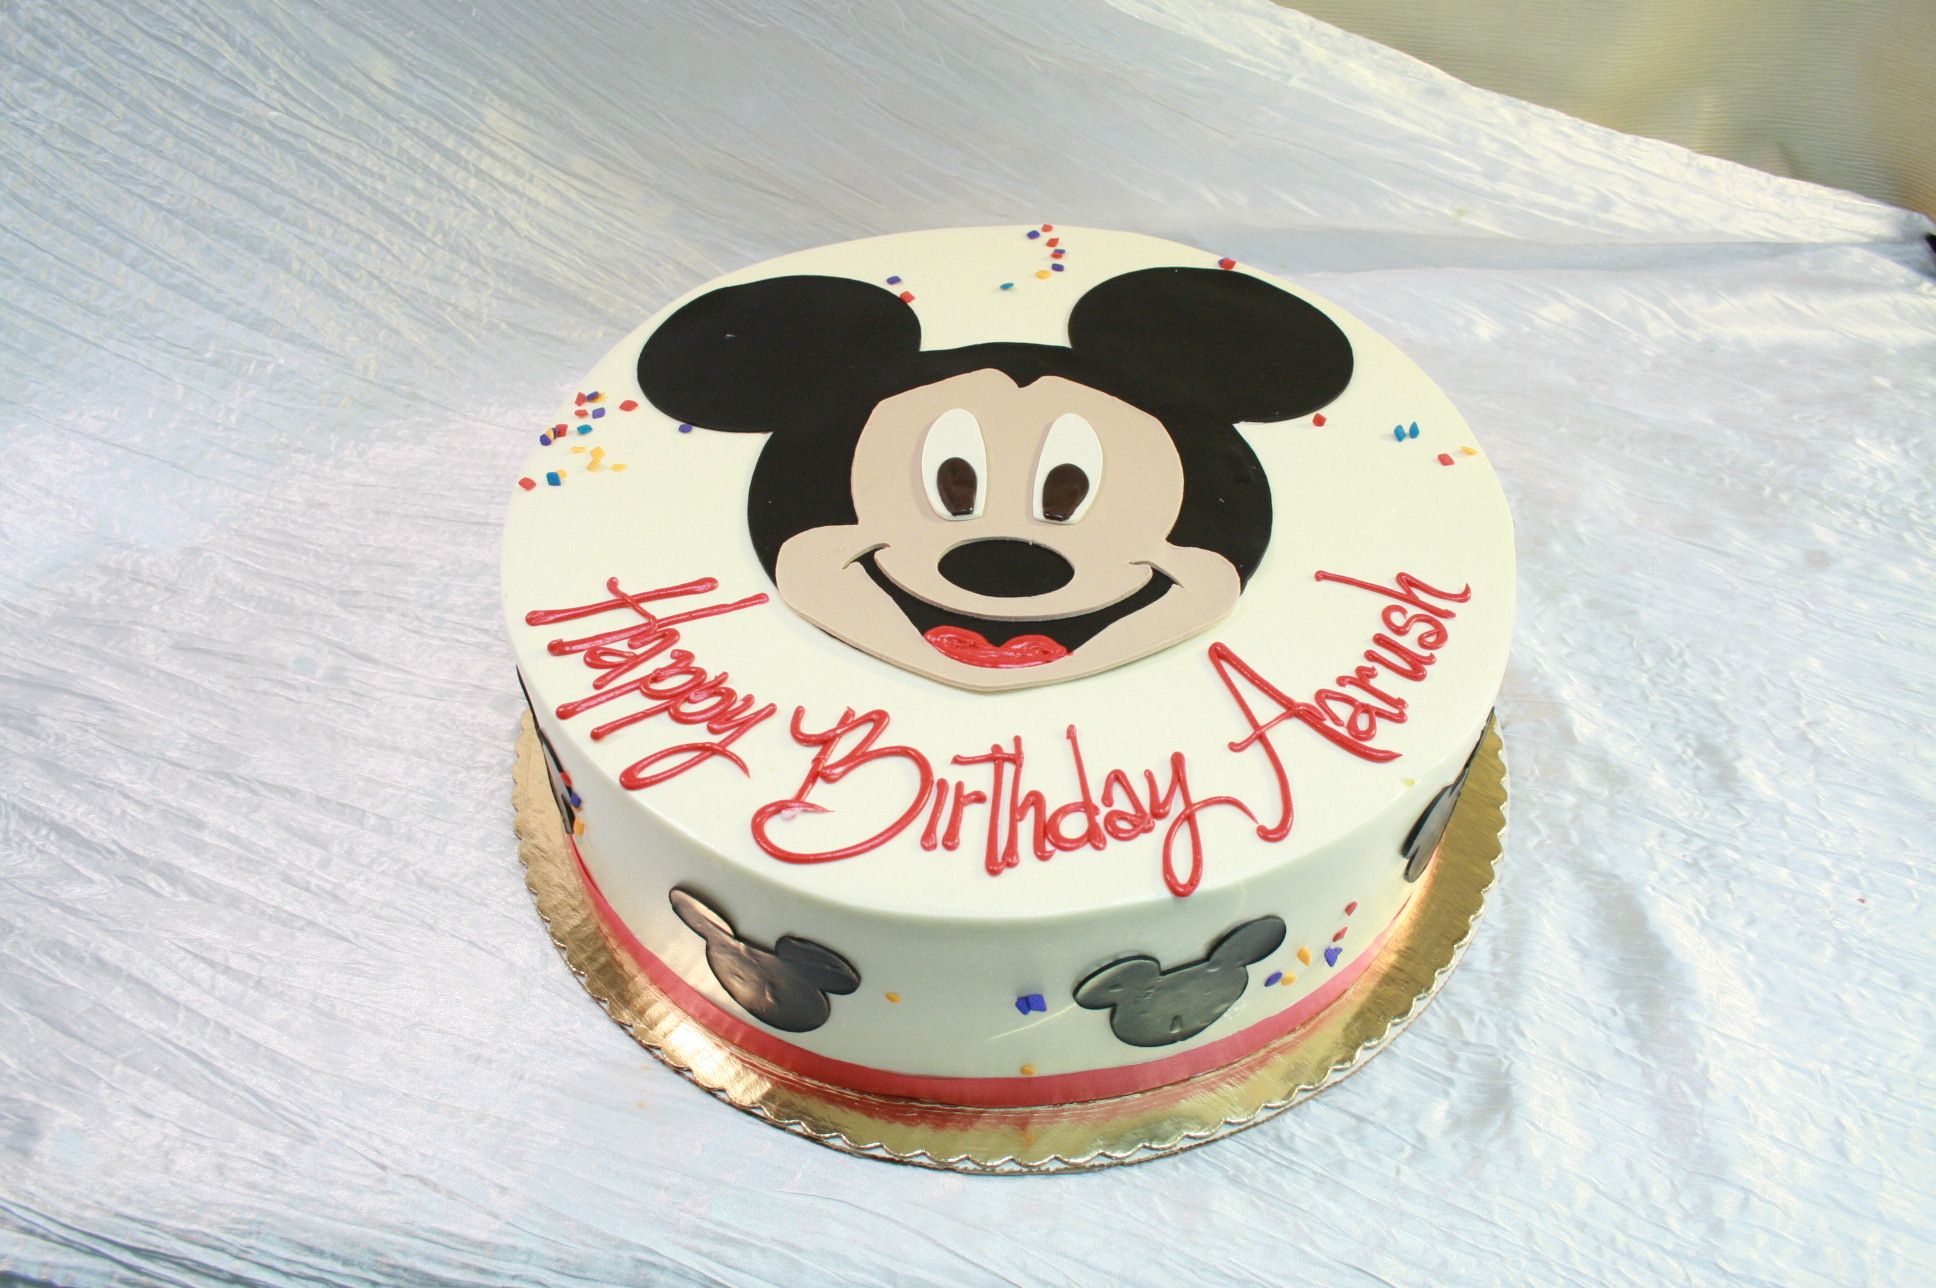 Mickey Mouse Cake Online | Send Mickey Mouse Cake For Kids - Winni